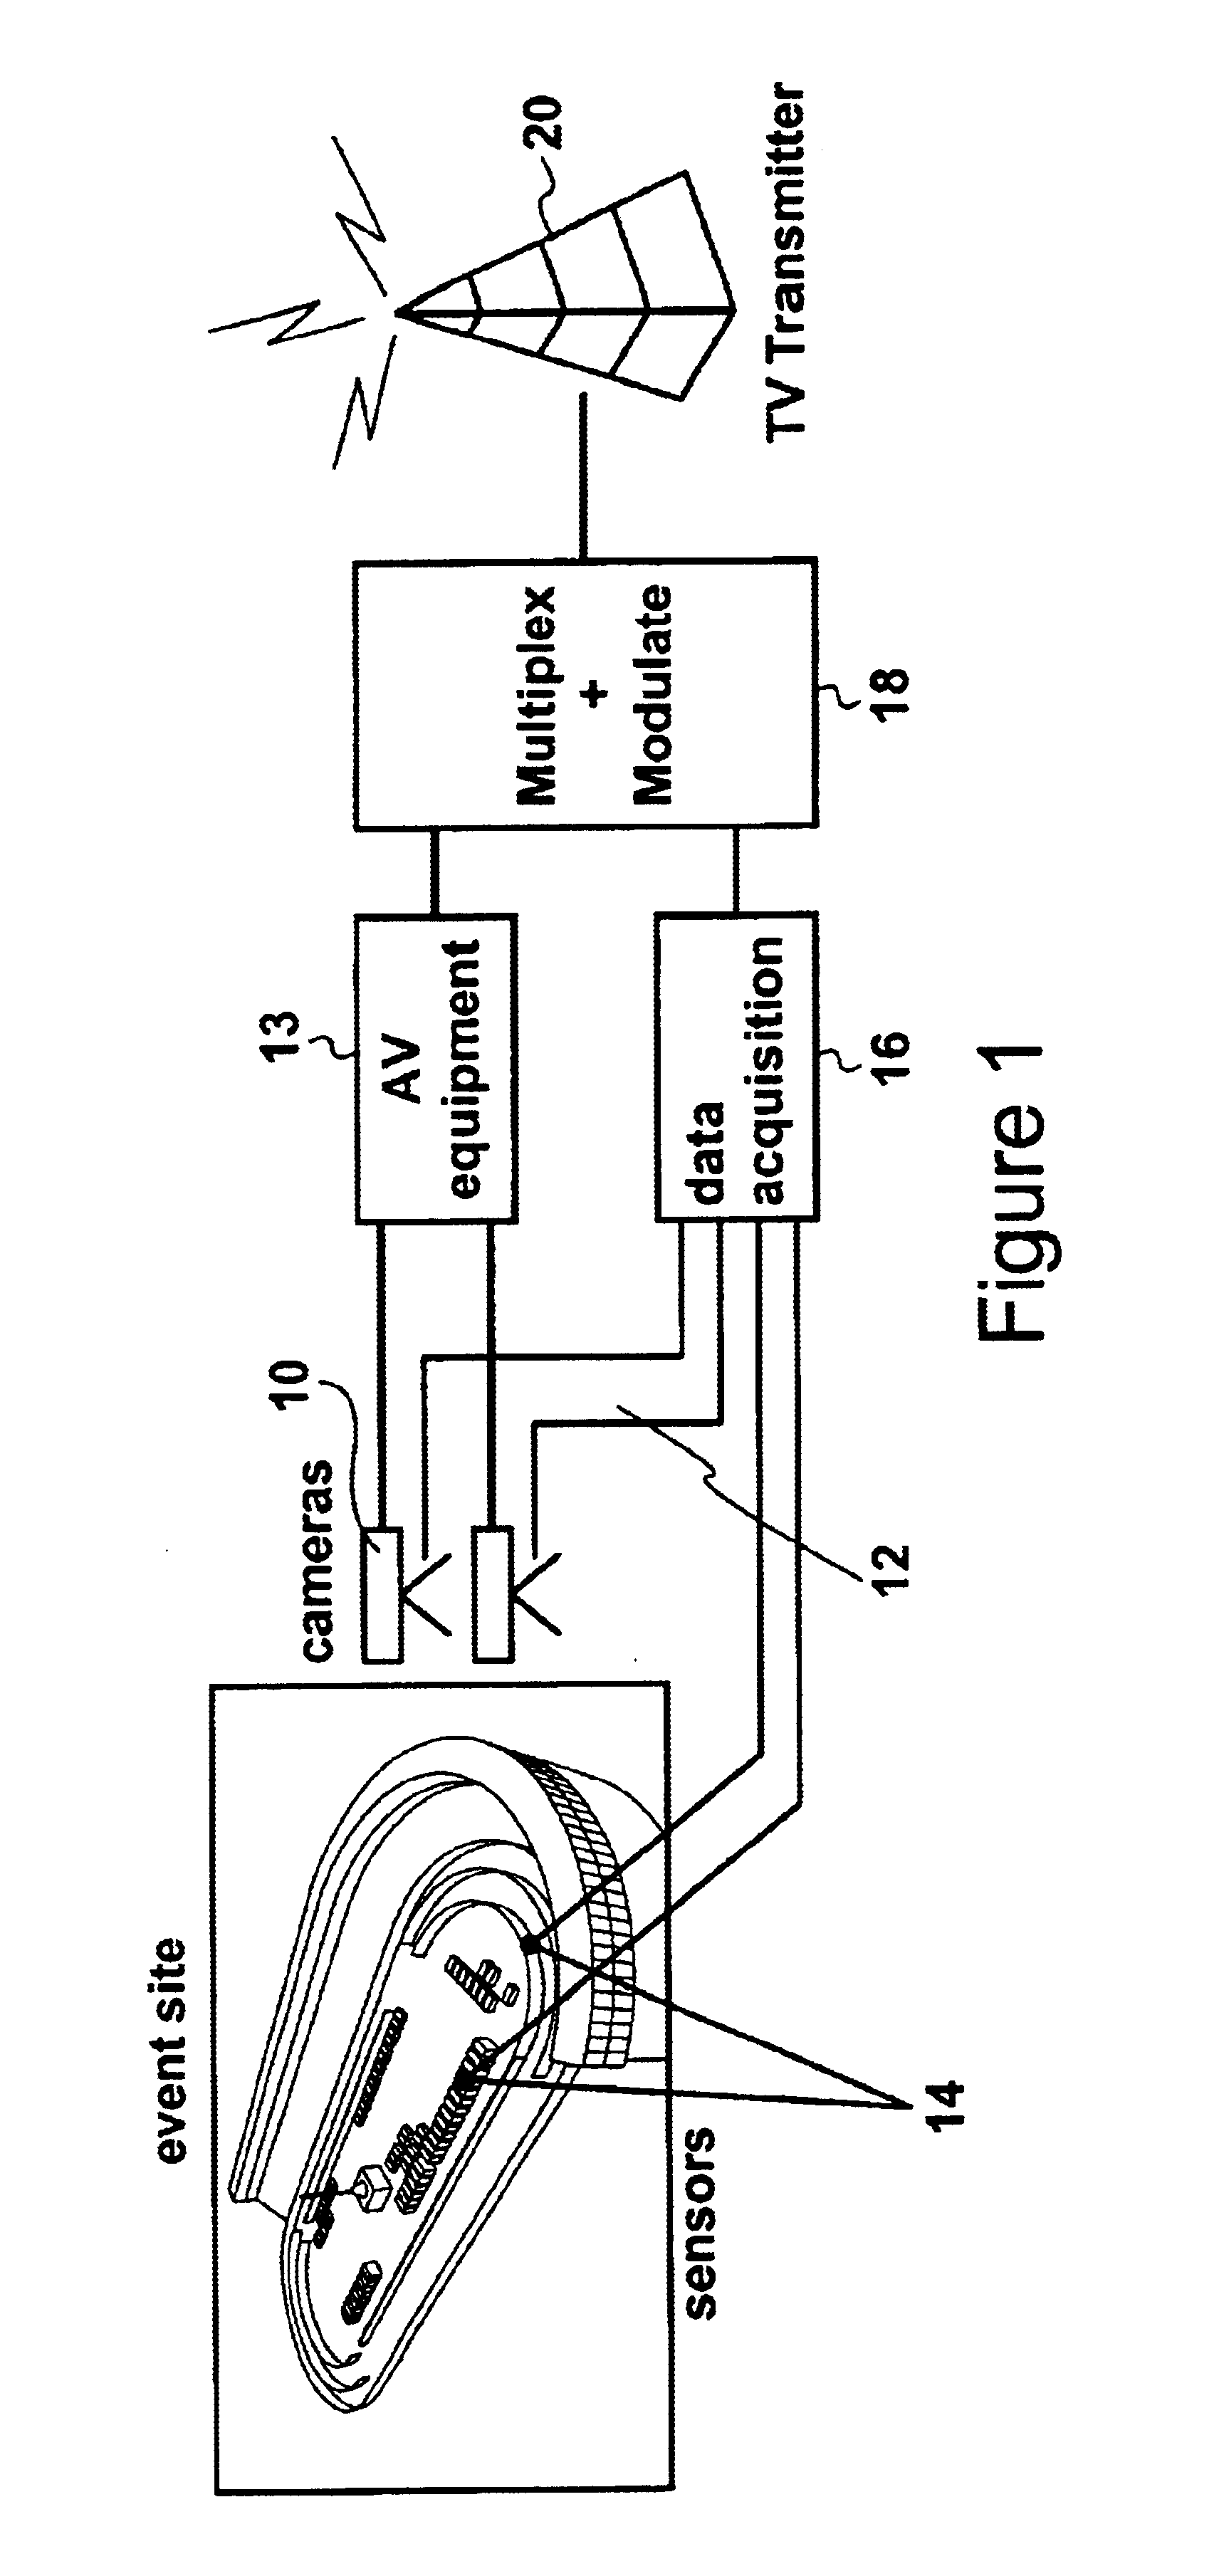 Method and apparatus for a declarative representation of distortion correction for add-on graphics in broadcast video